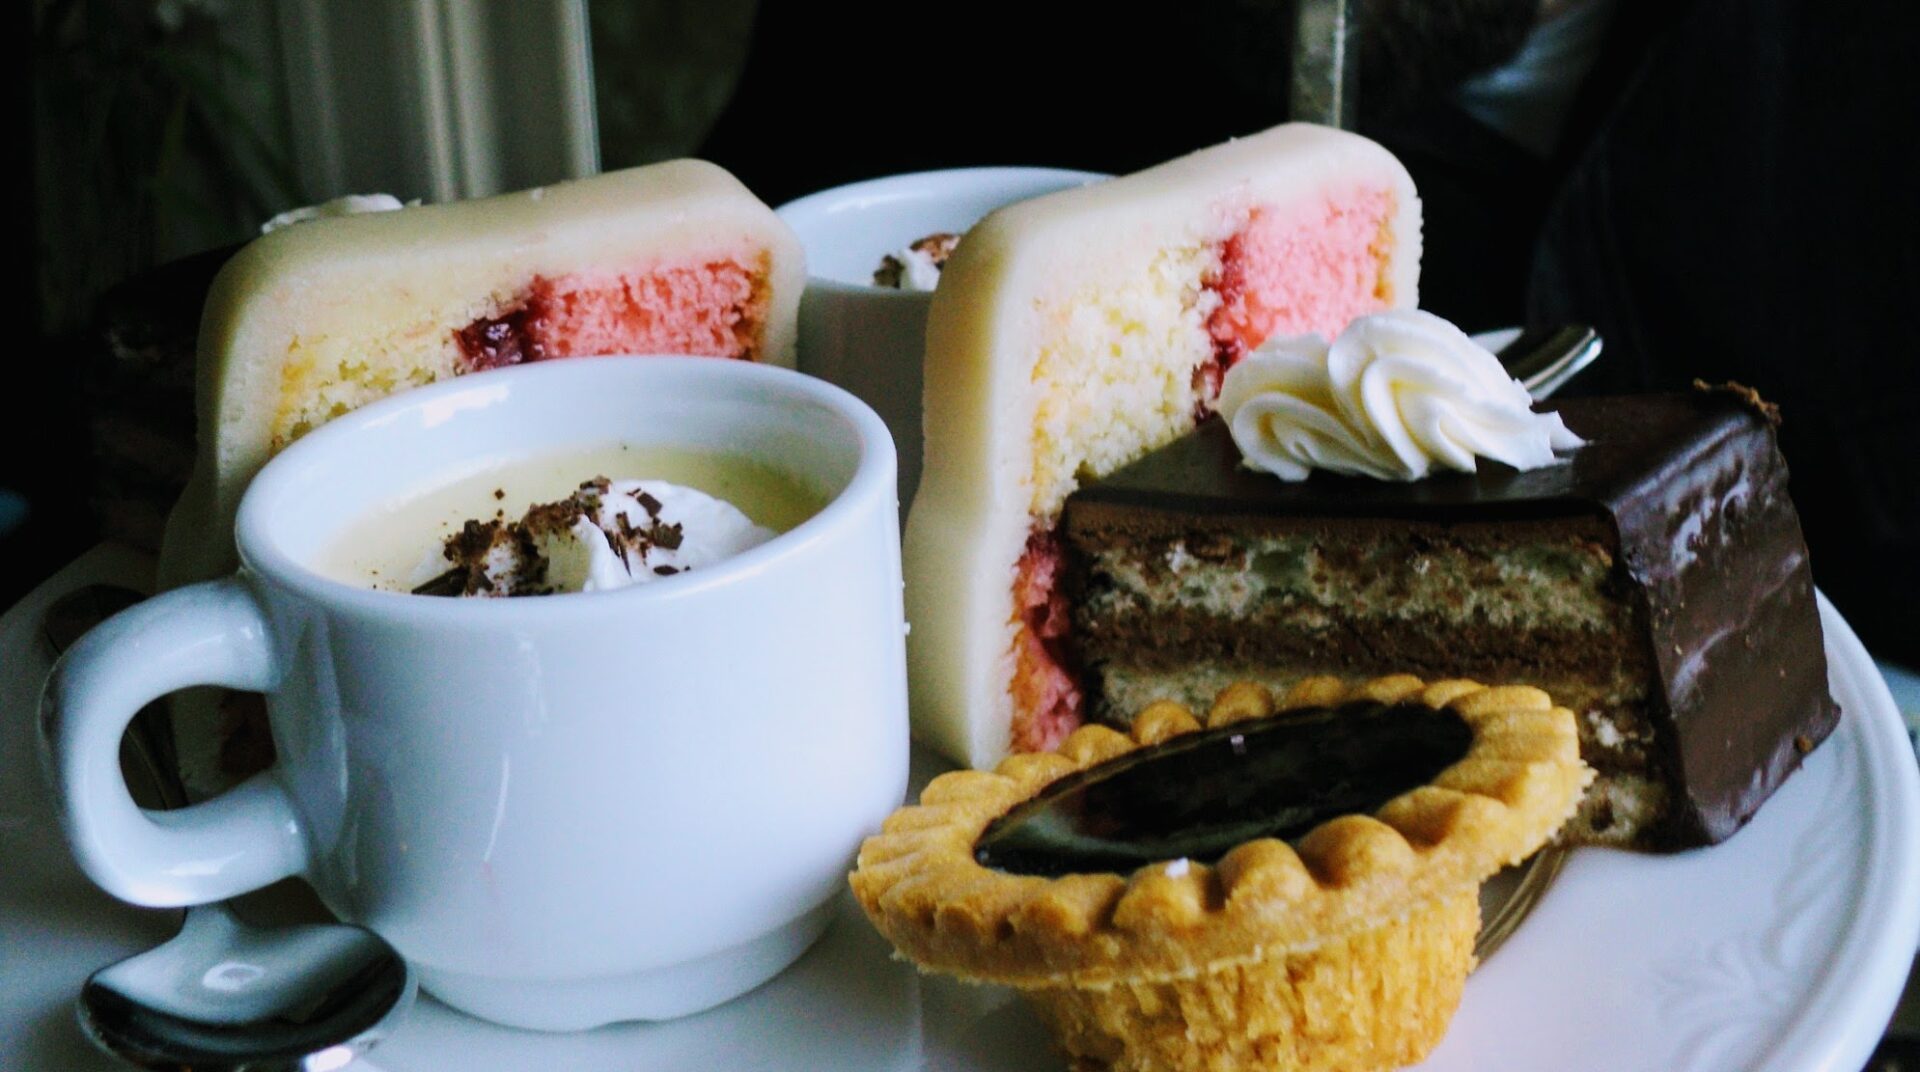 A close up of a mug with cream and chocolate shavings, a mini tart, a cake with chocolate frosting and two thin white and pink cakes with white frosting during afternoon tea in Victoria, BC